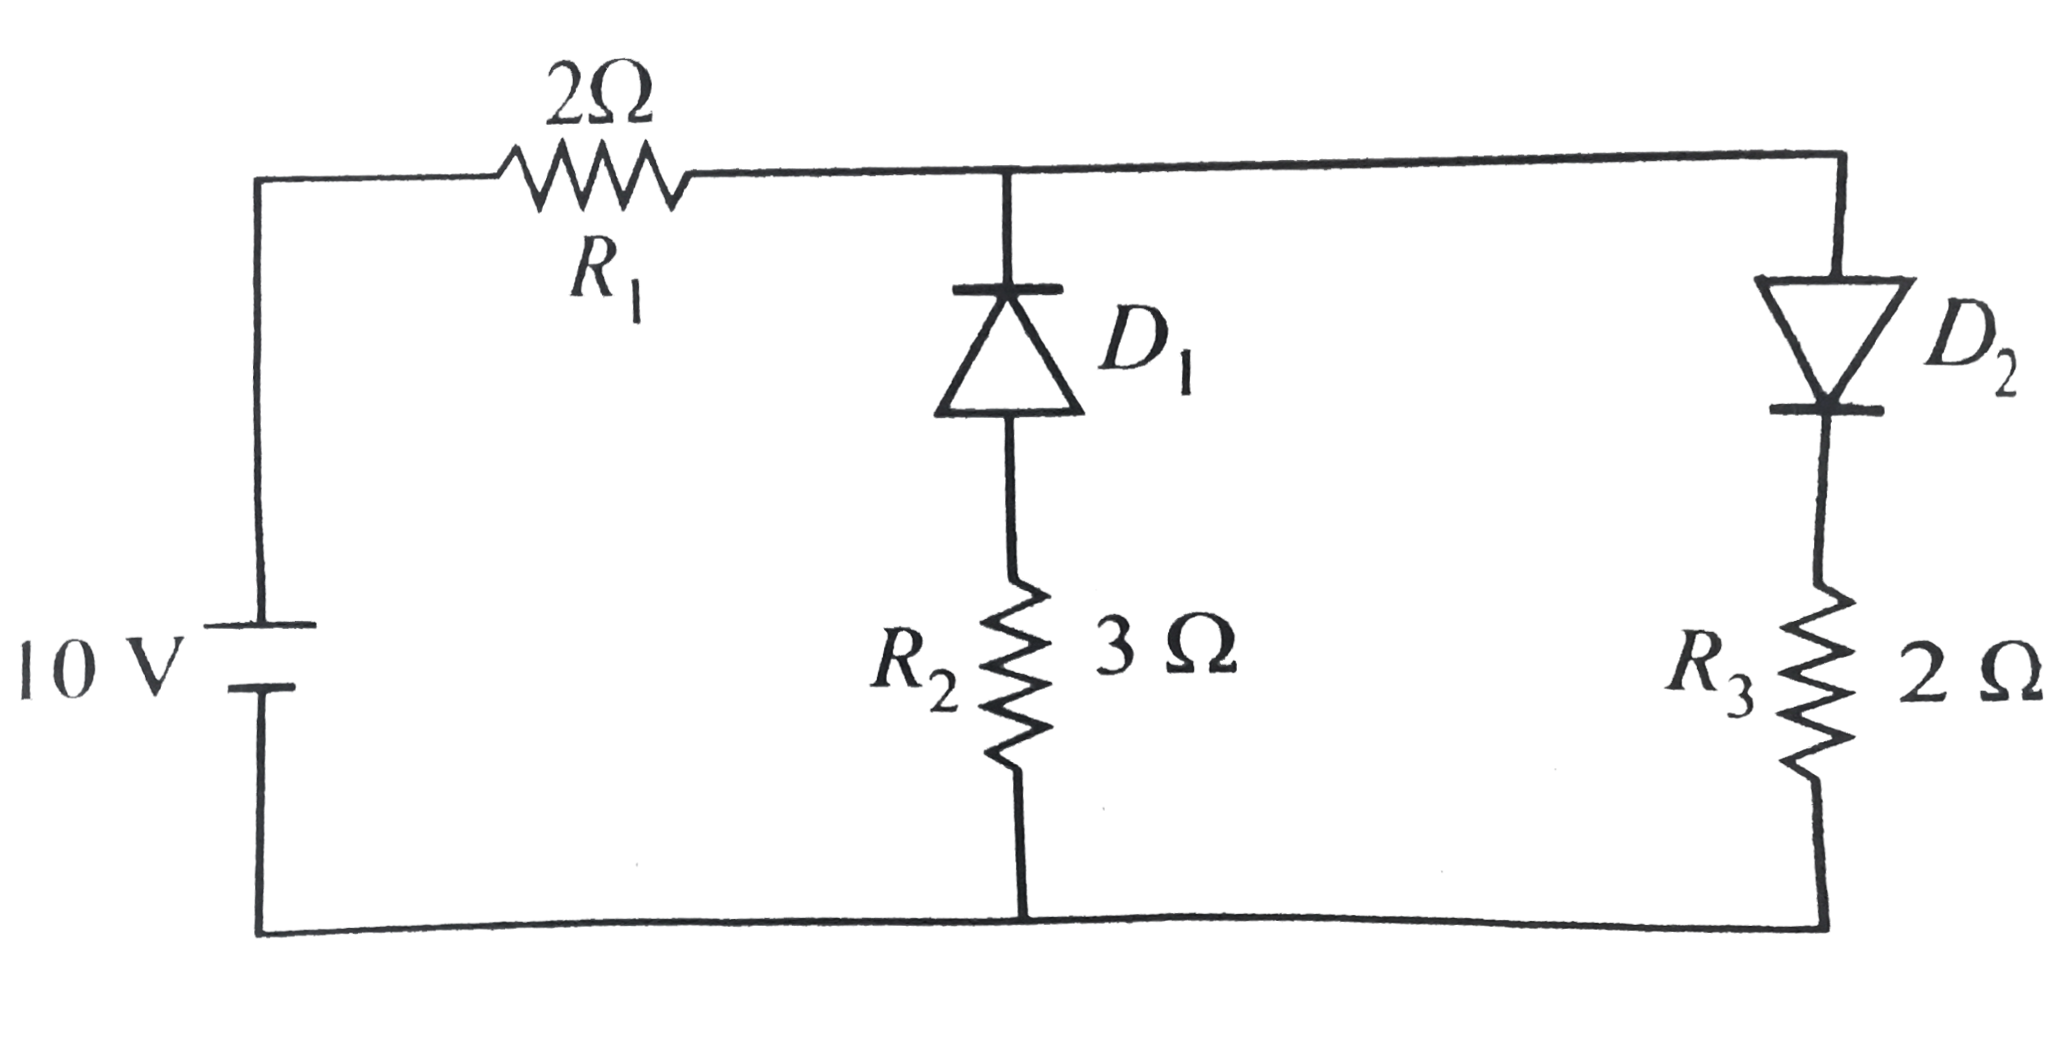 The given circuit has two ideal diodes connected as show in the figure. The current flowing through the resistance R(1) will be